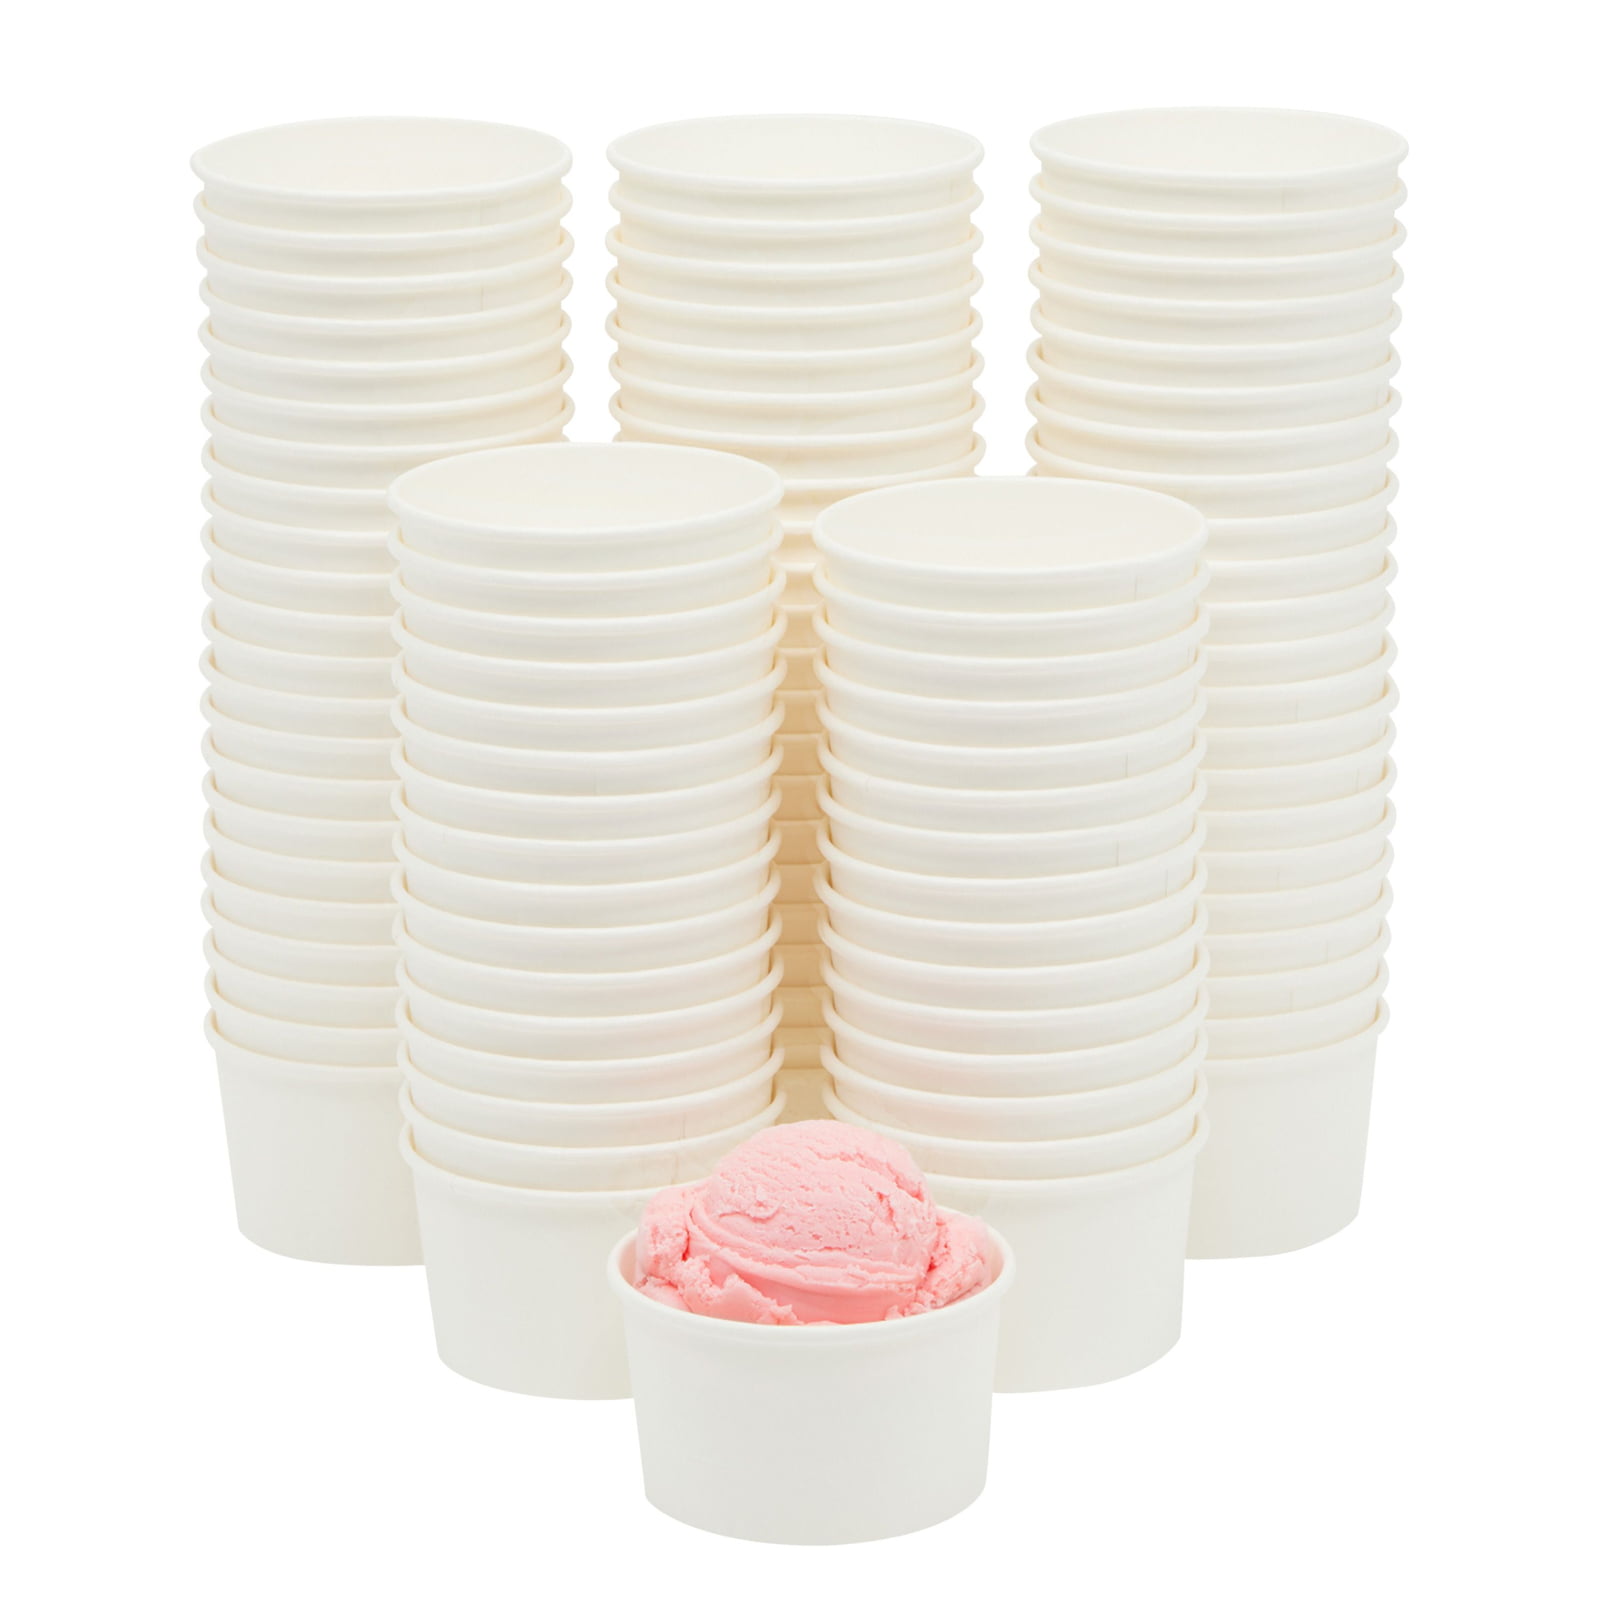 4 oz Pink Ice Cream Cups Striped Ice Cream Disposable Party Cups and Bowls 